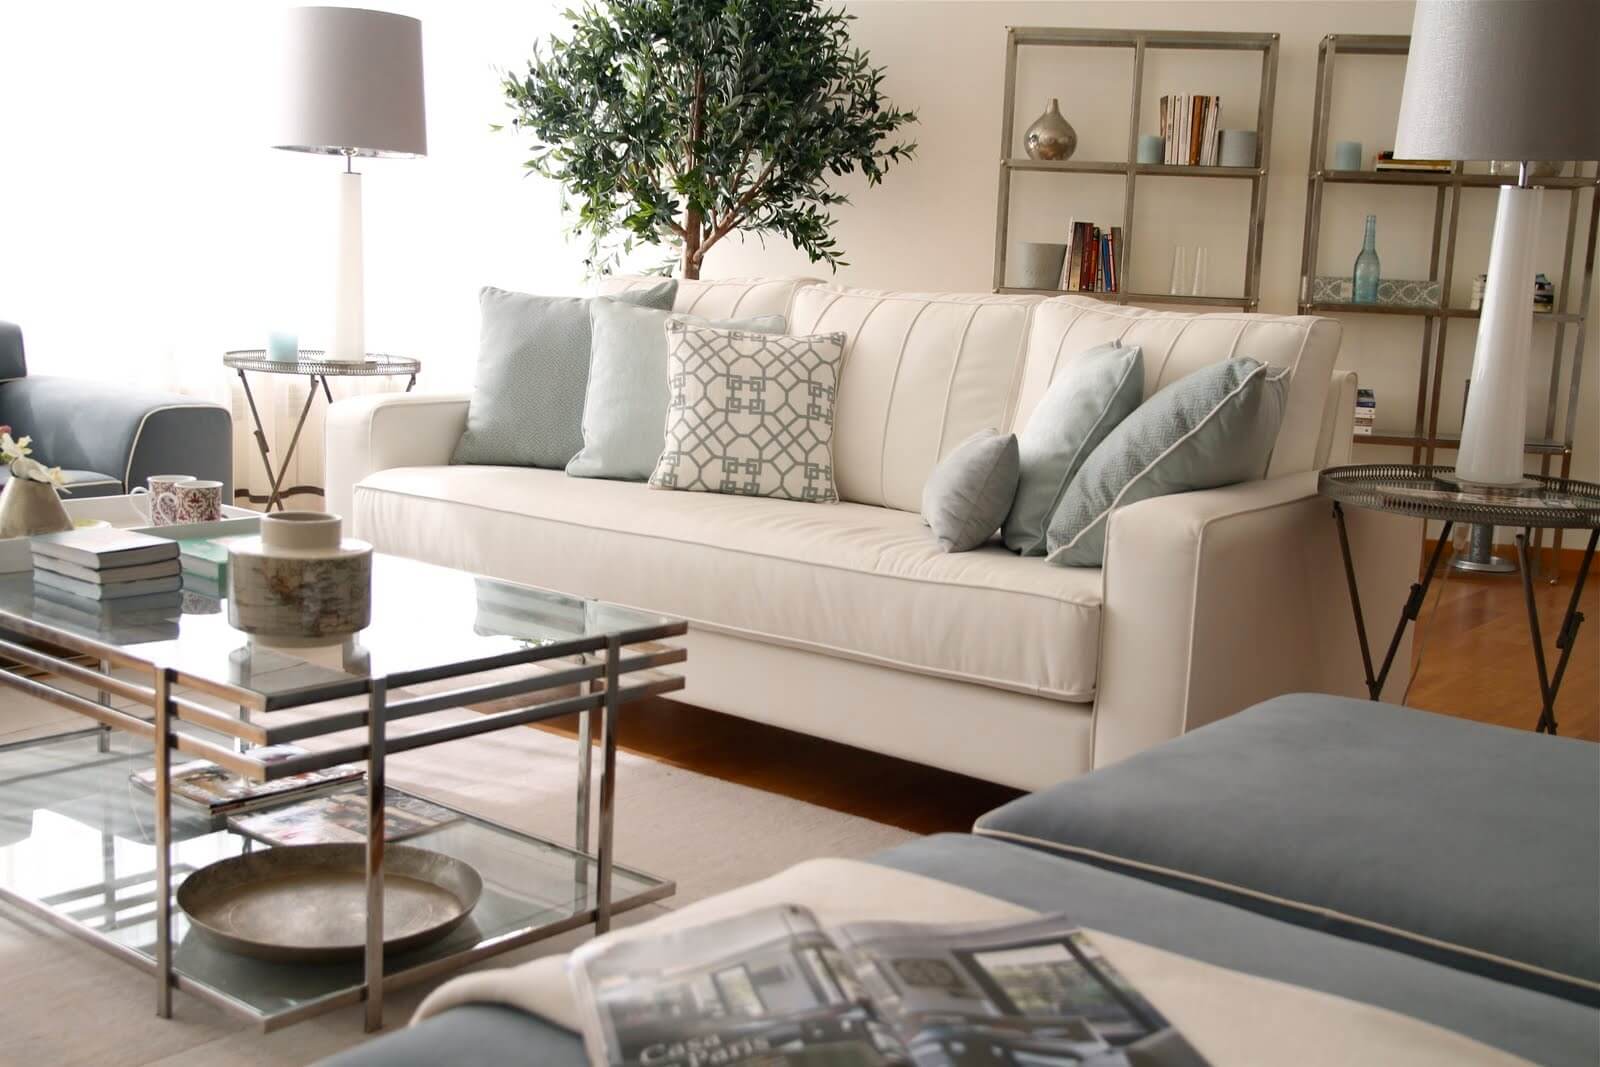 Ana Antunes home styling blog cococozy blue grey white living room